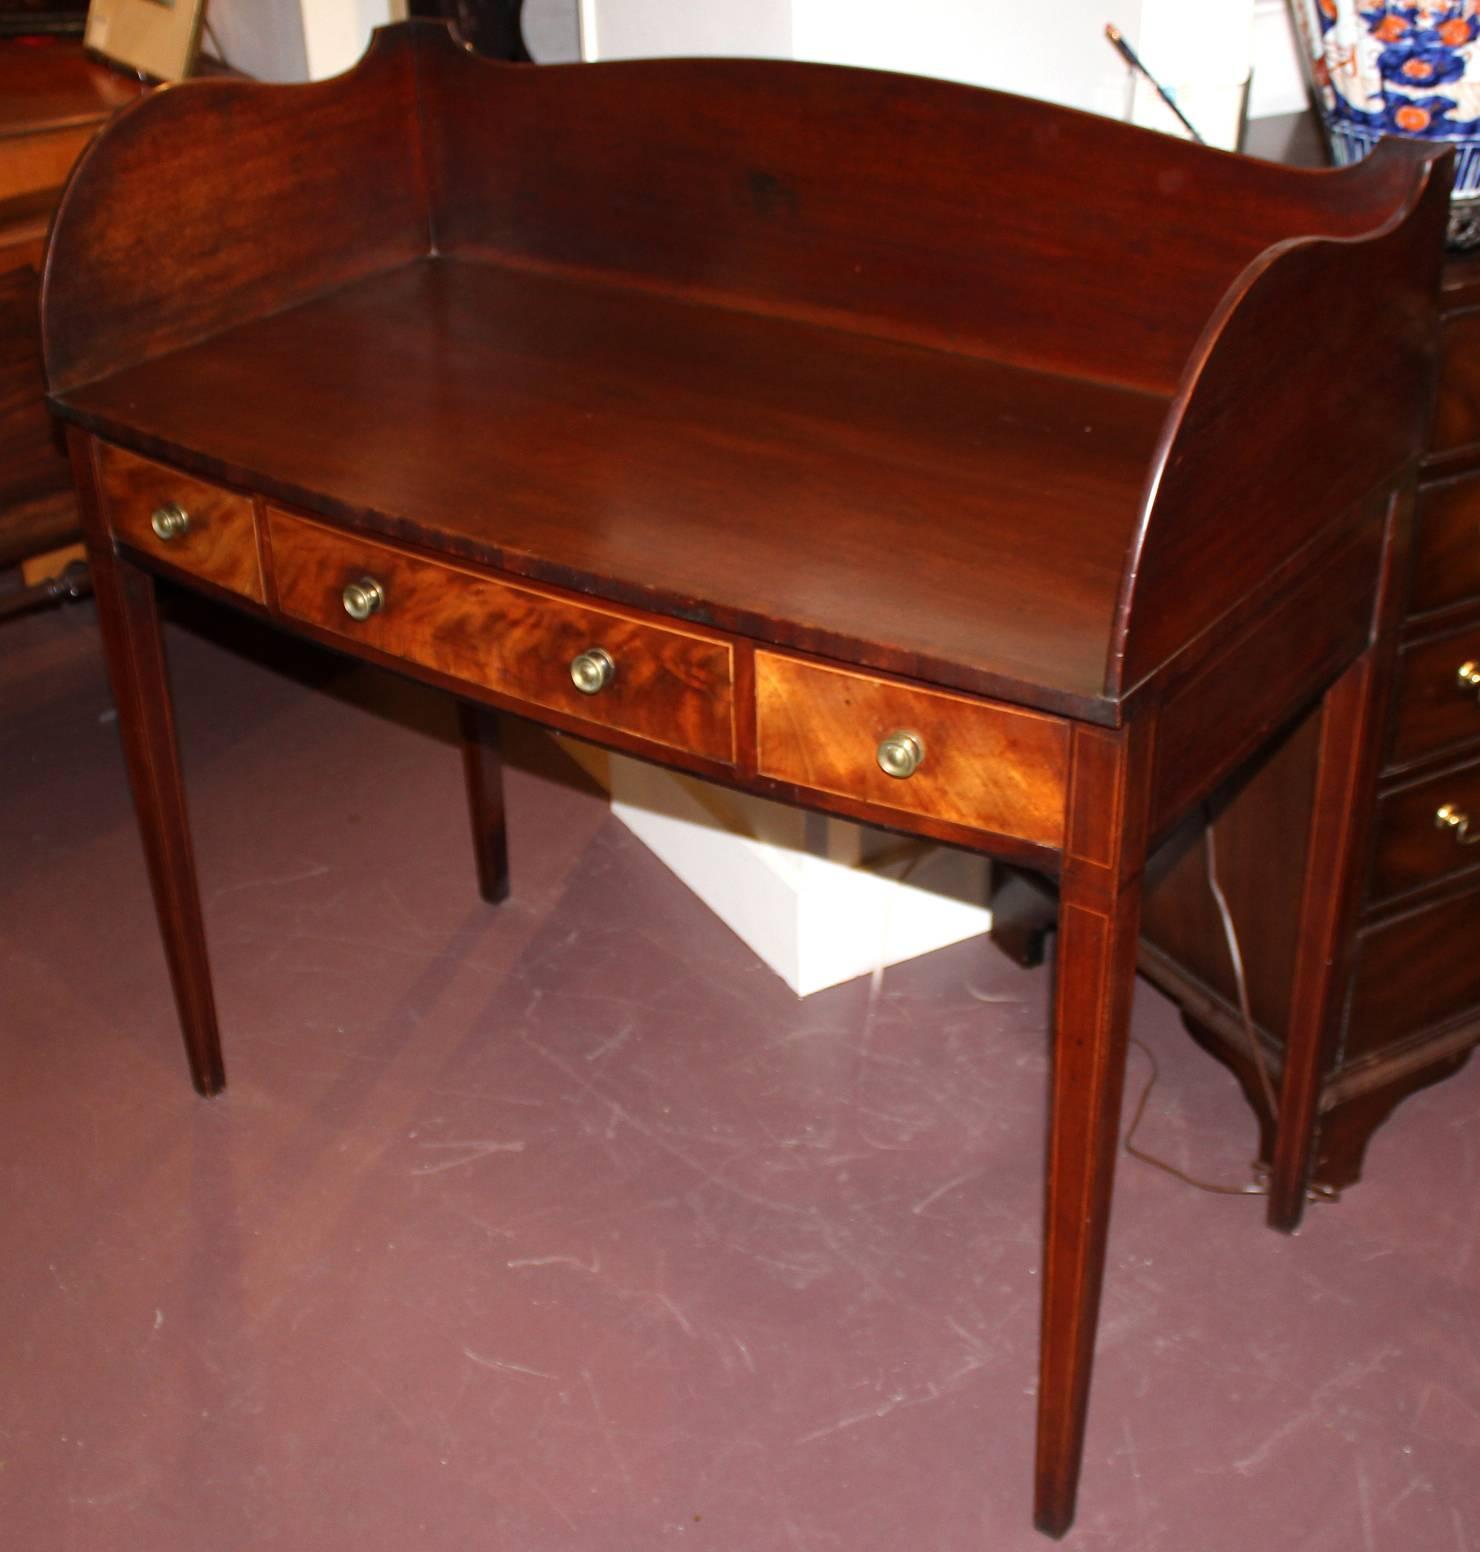 Carved 19th Century English Mahogany Bow Front Server with Shaped Splash Rail